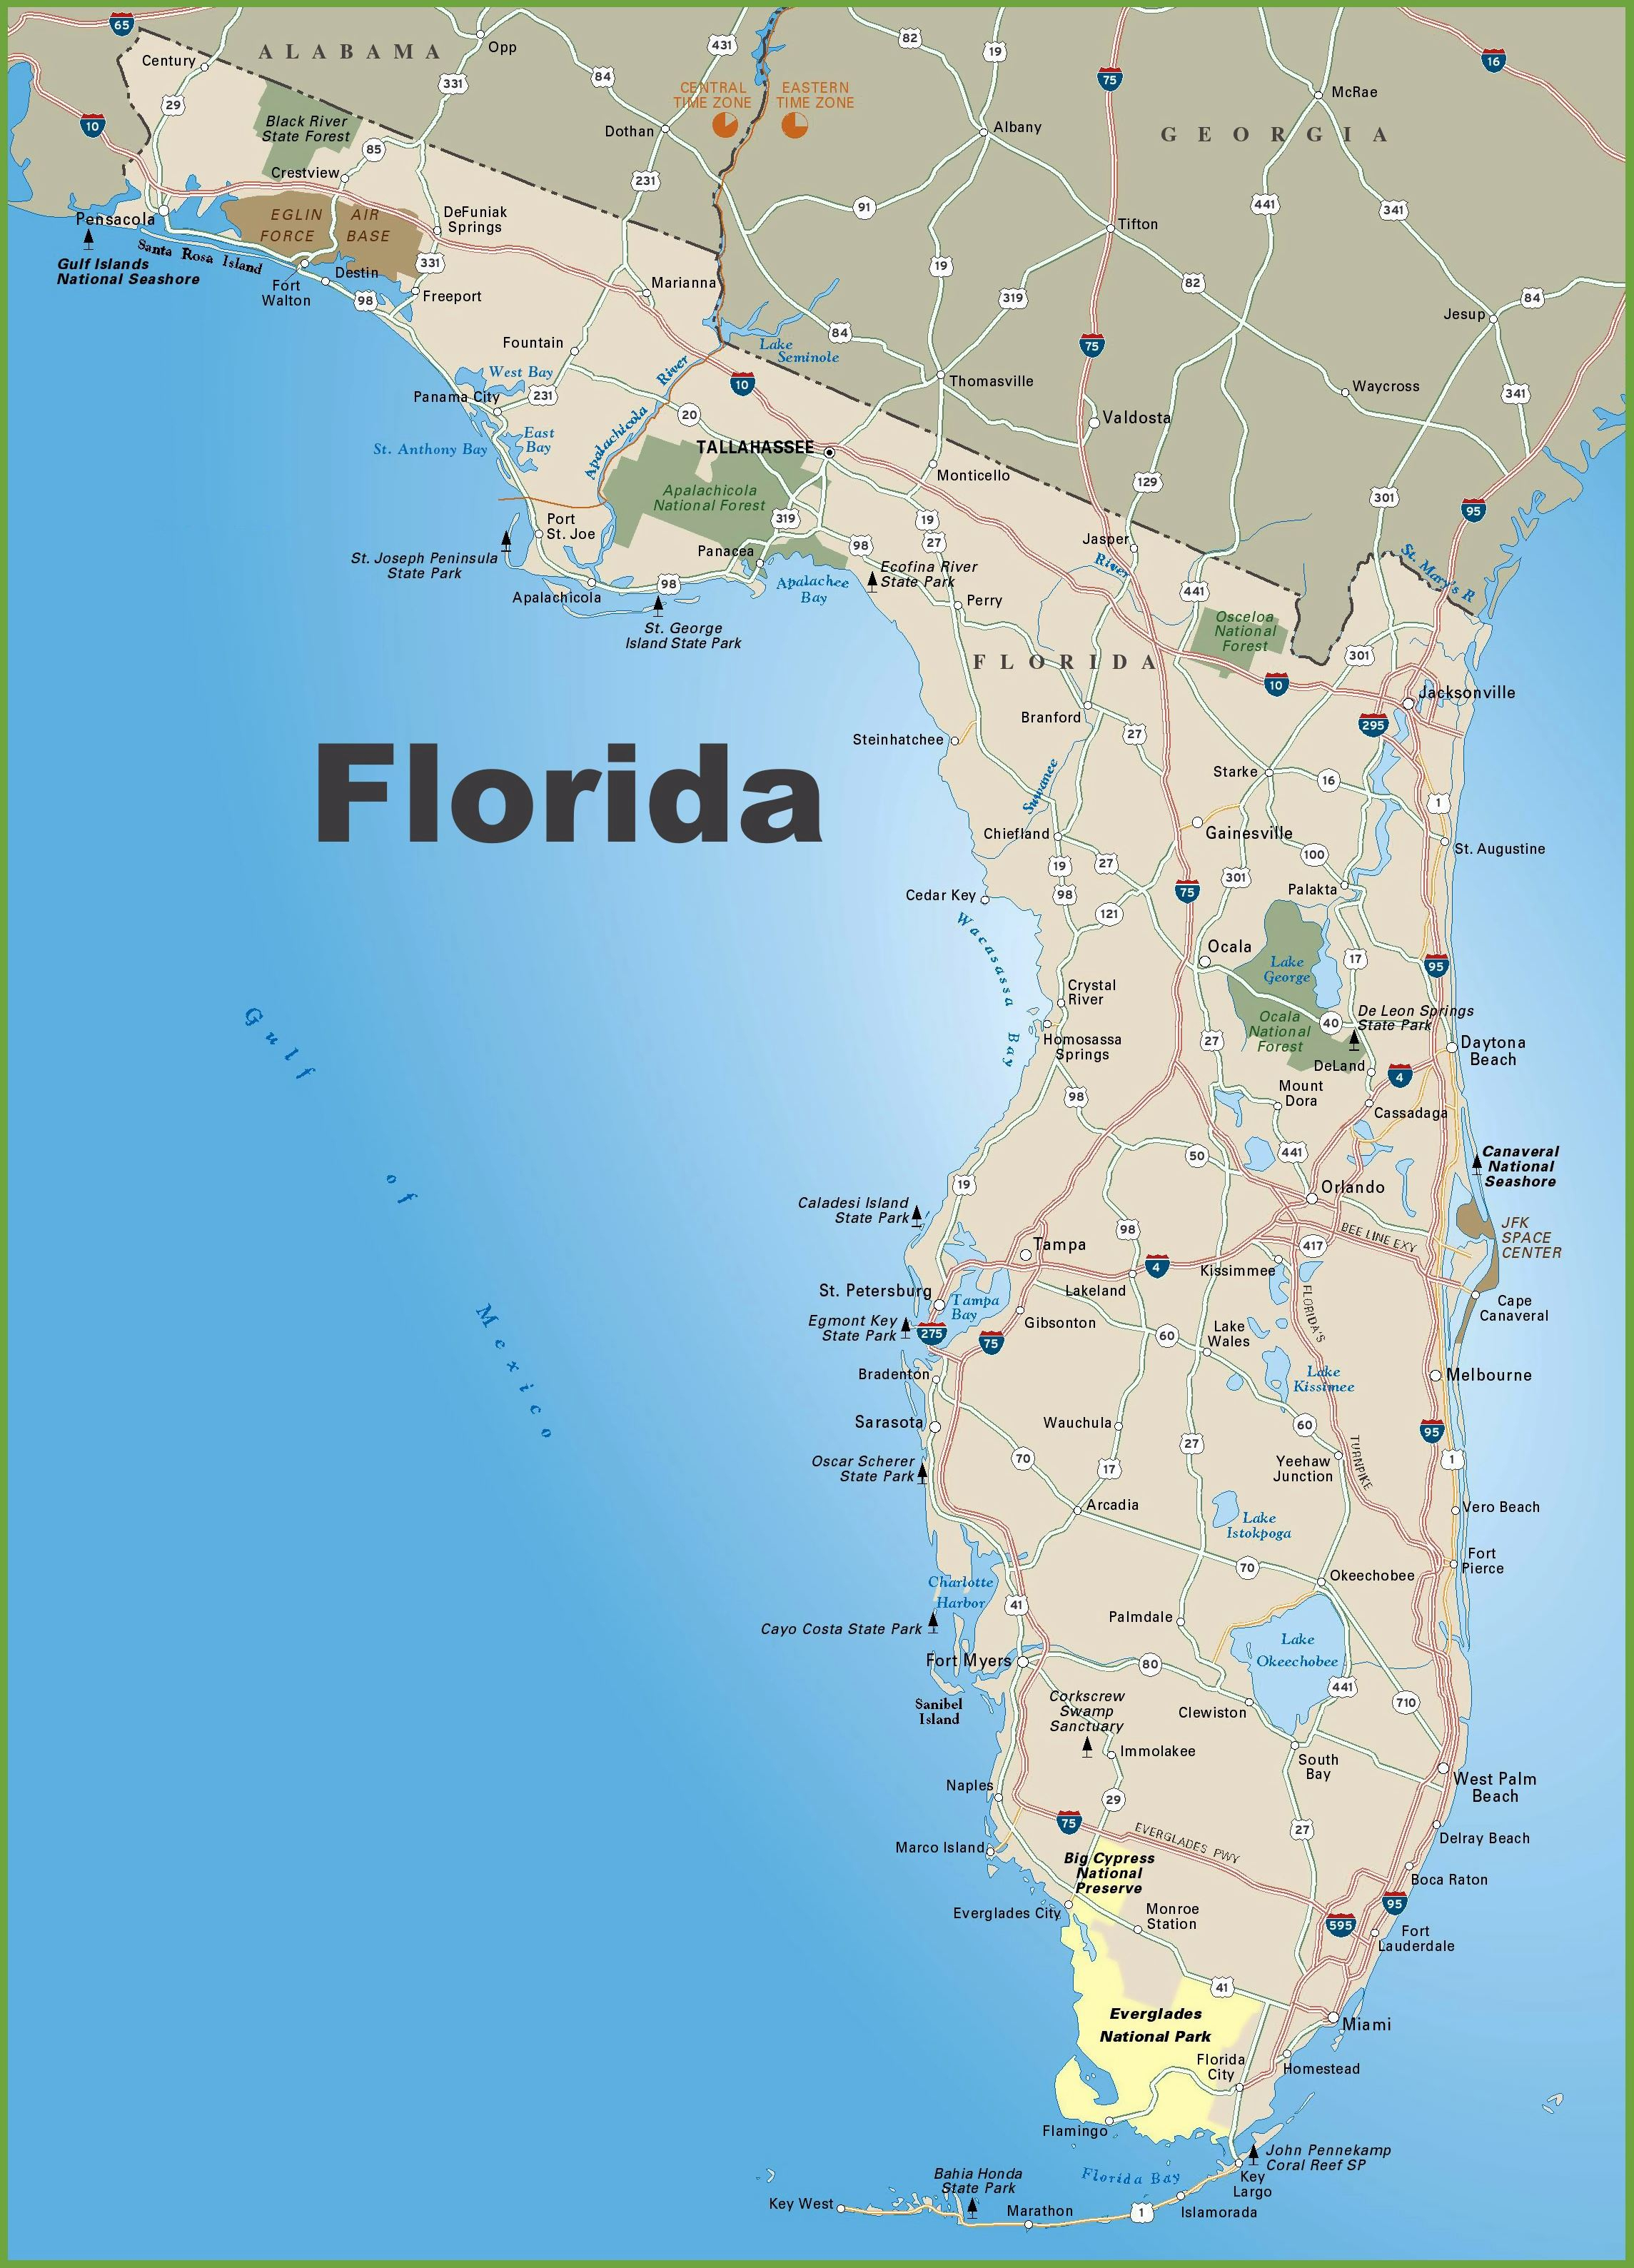 Large Florida Maps For Free Download And Print | High-Resolution And - Lake Wales Florida Map